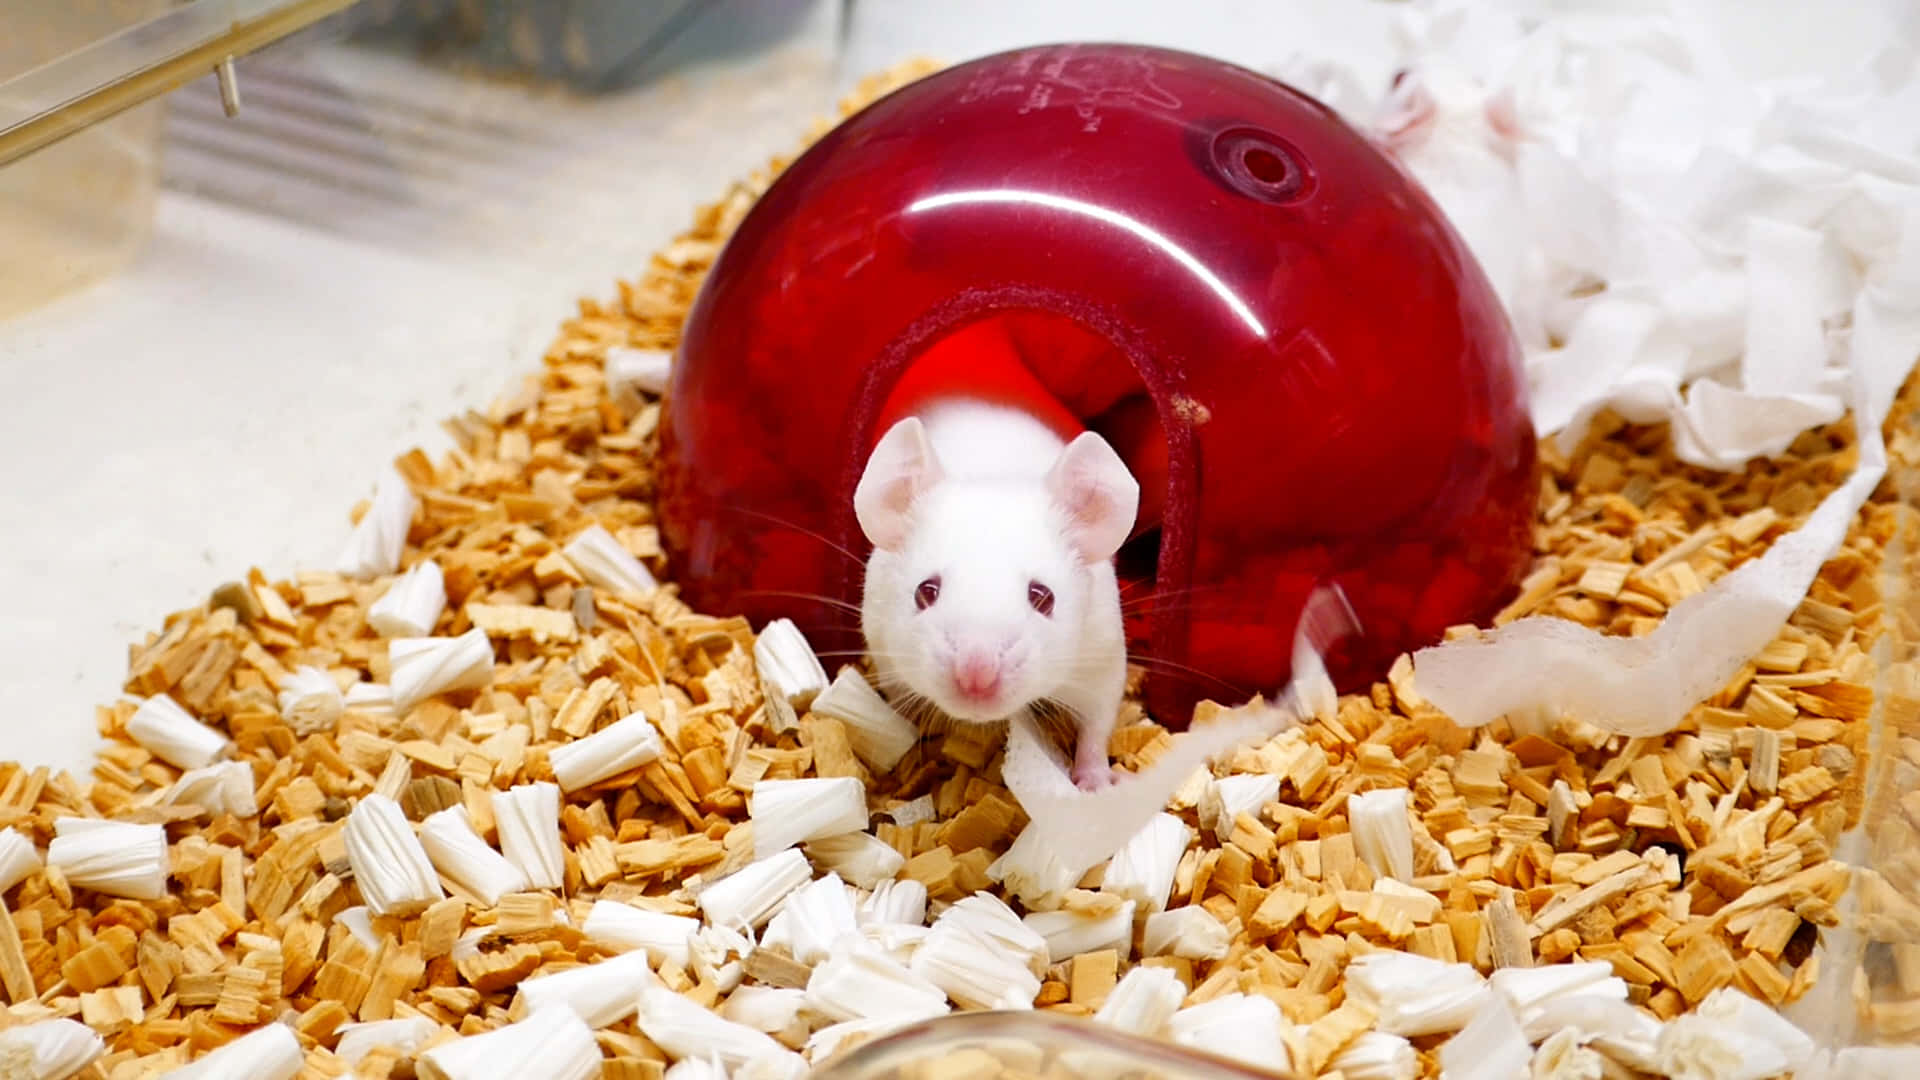 A White Rat Is In A Red Plastic Ball